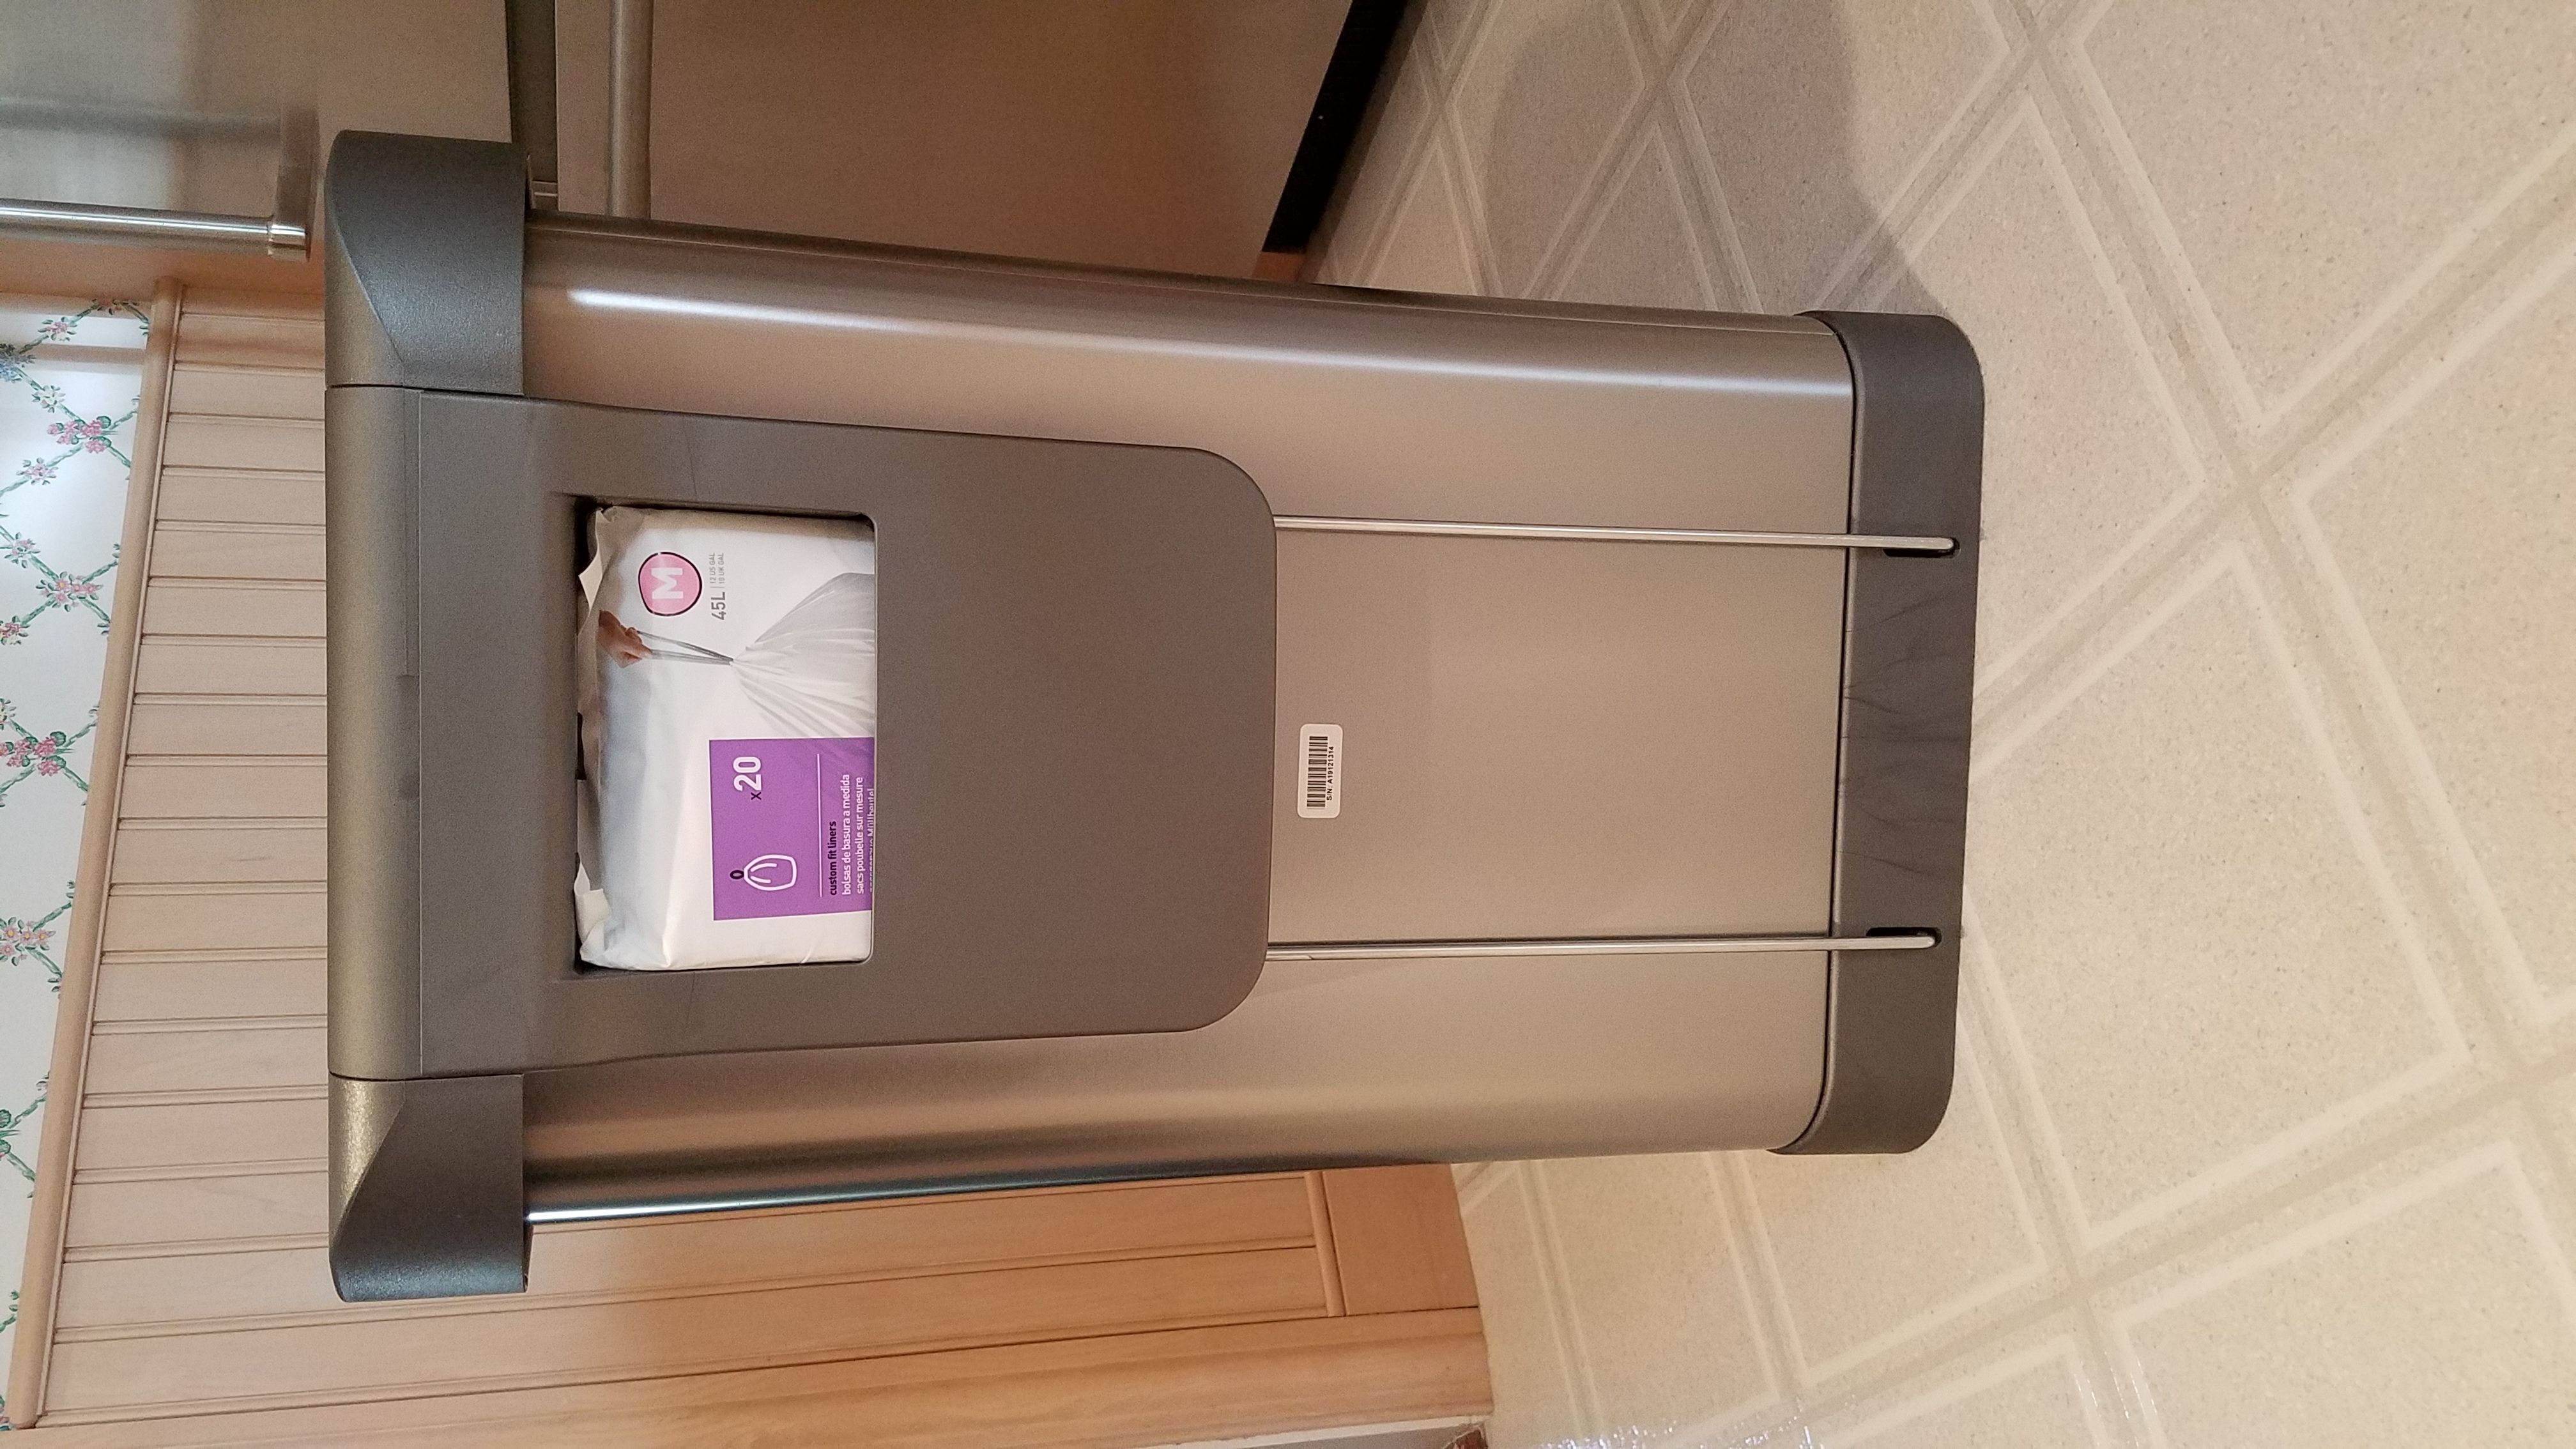 These Simplehuman Generic Bags Work Just as Well as the Real Thing